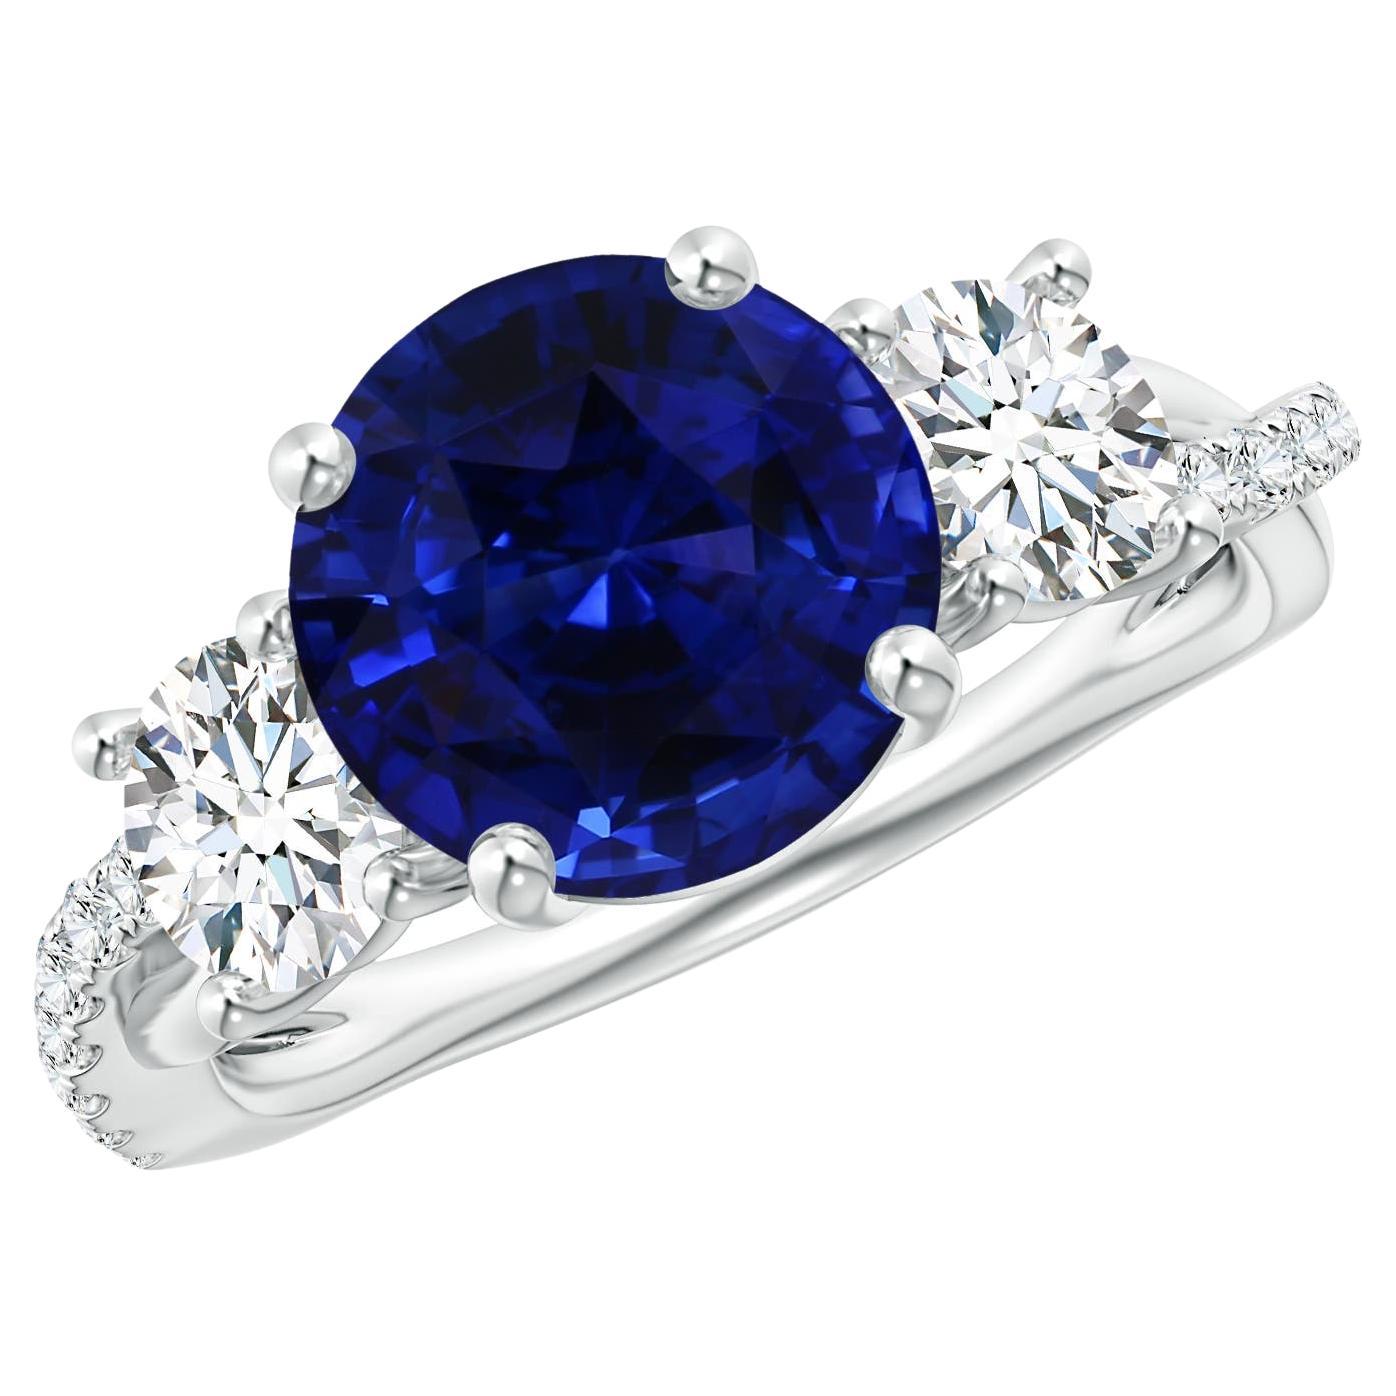 For Sale:  GIA Certified Natural Blue Sapphire Ring in White Gold with Diamonds